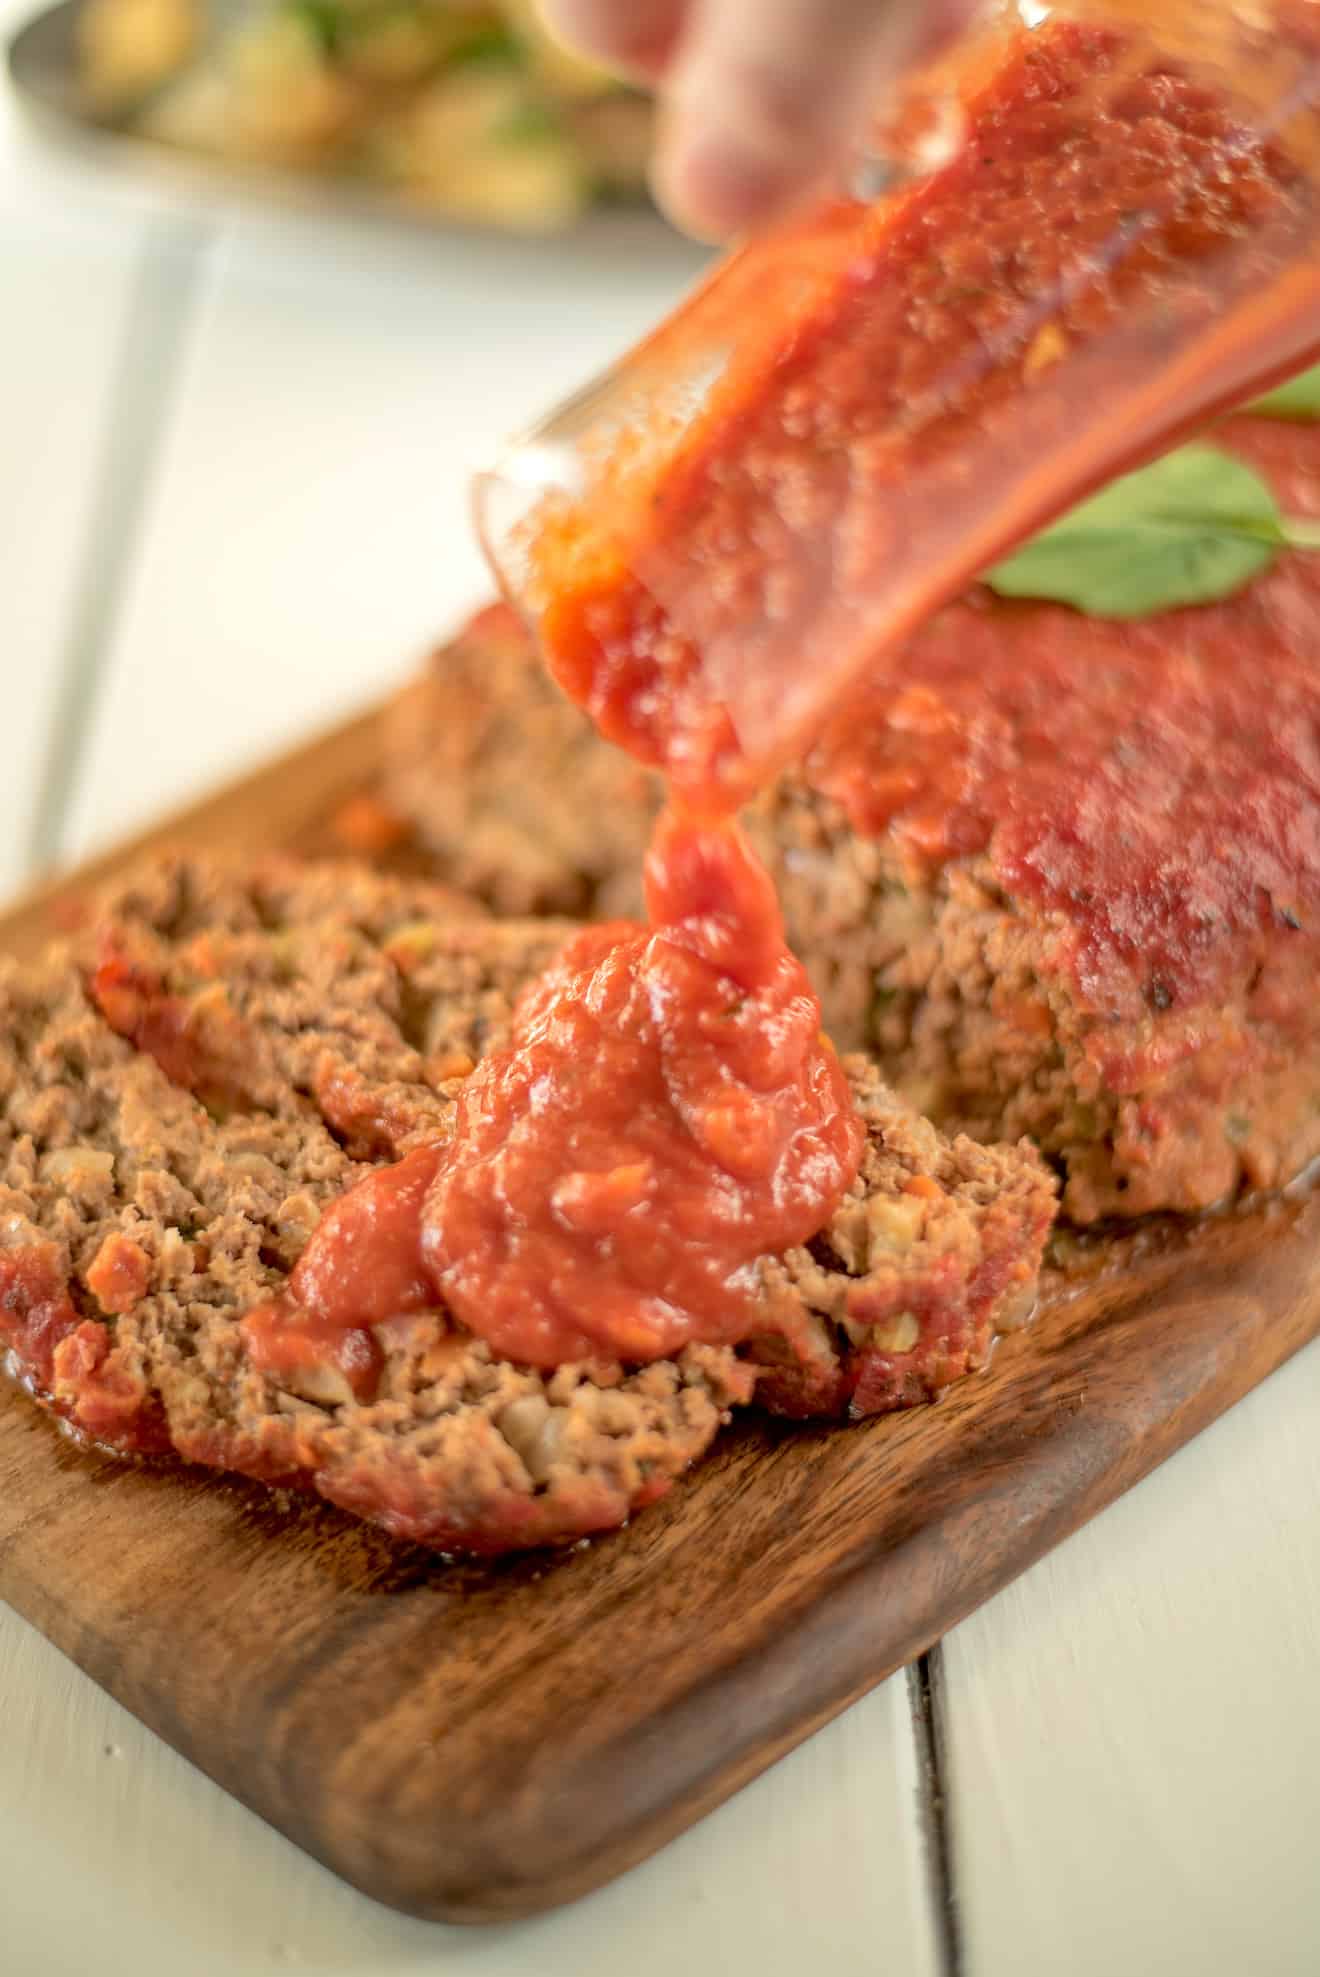 Slices of meatloaf topped with tomato marinara sauce